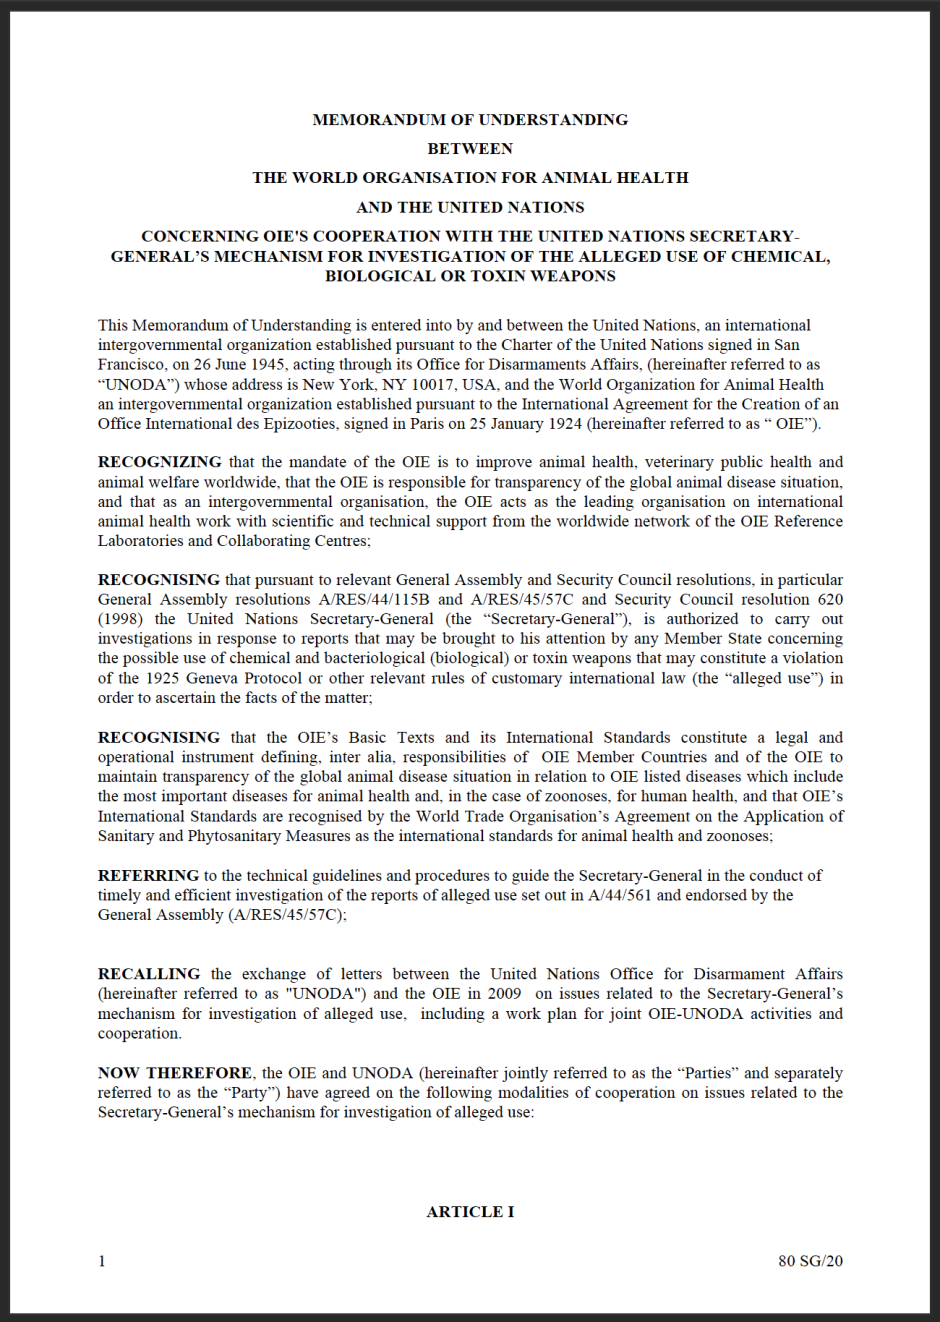 Memorandum of understanding between the OIE and the United Nations Office for Disarmament Affairs (UNODA)